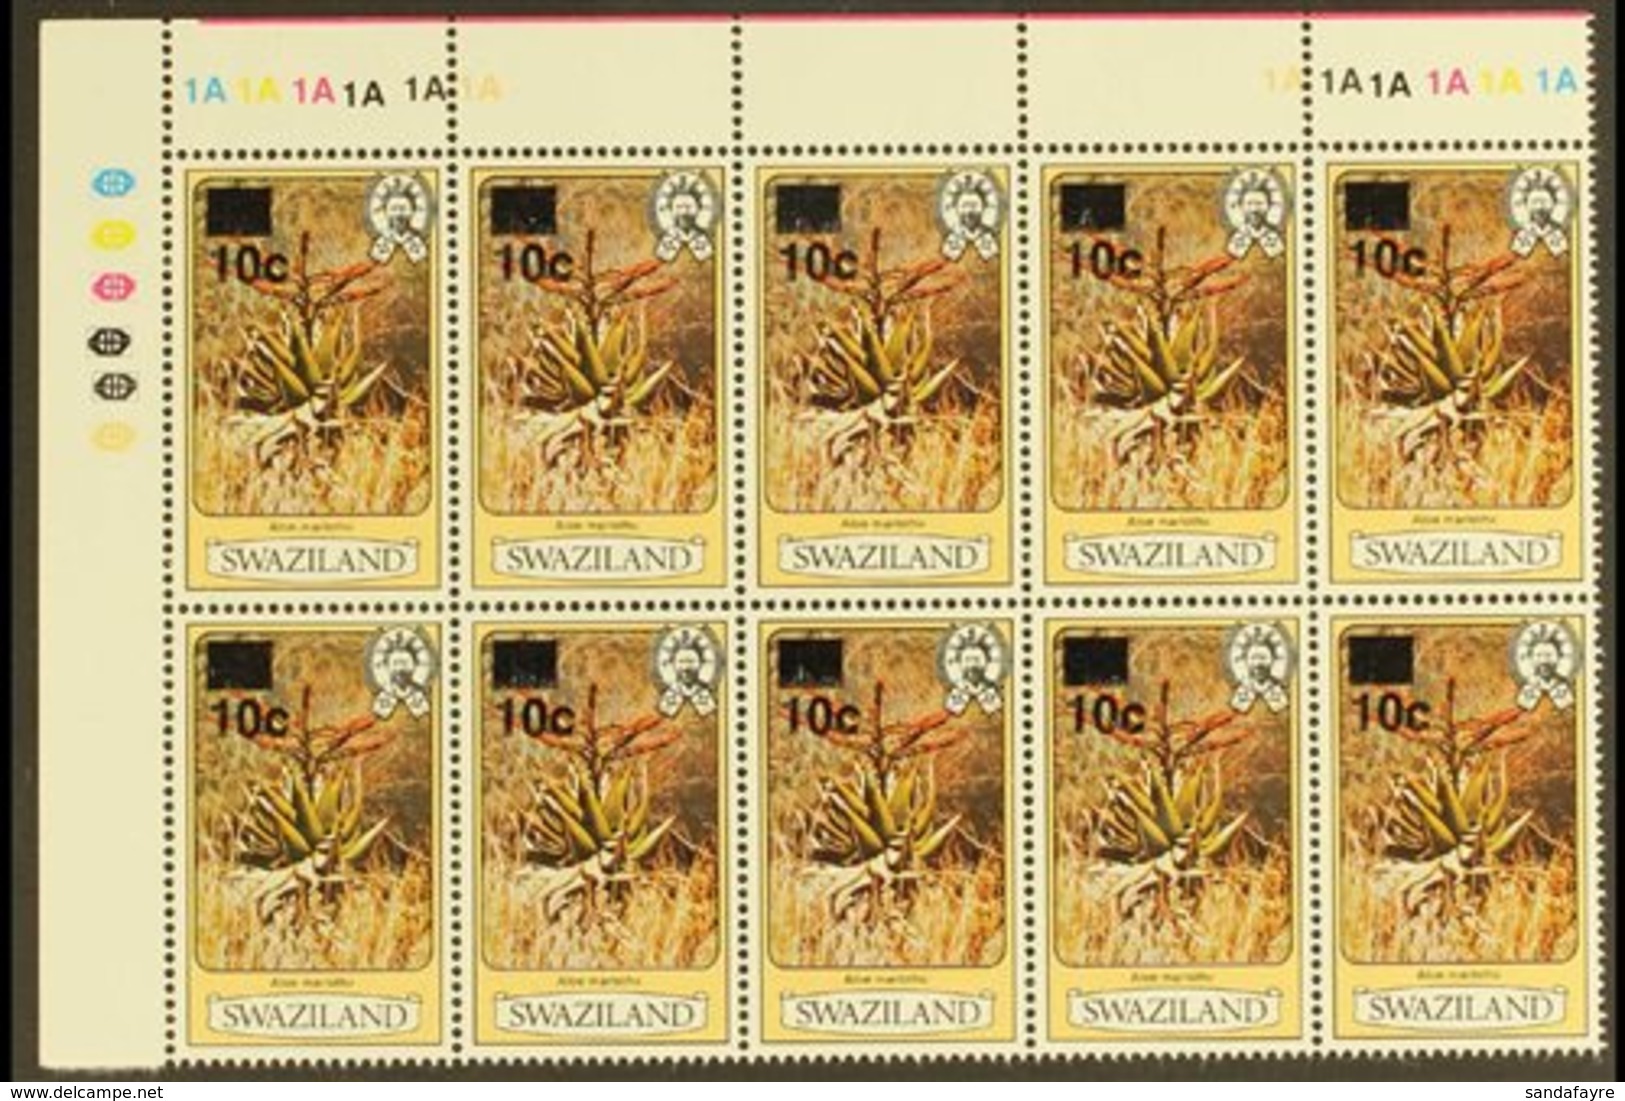 \Y 1984\Y 10c On 4c Surcharge Perf 13½ Without Imprint Date, SG 471, Superb Never Hinged Mint Top Left Corner CYLINDER N - Swaziland (...-1967)